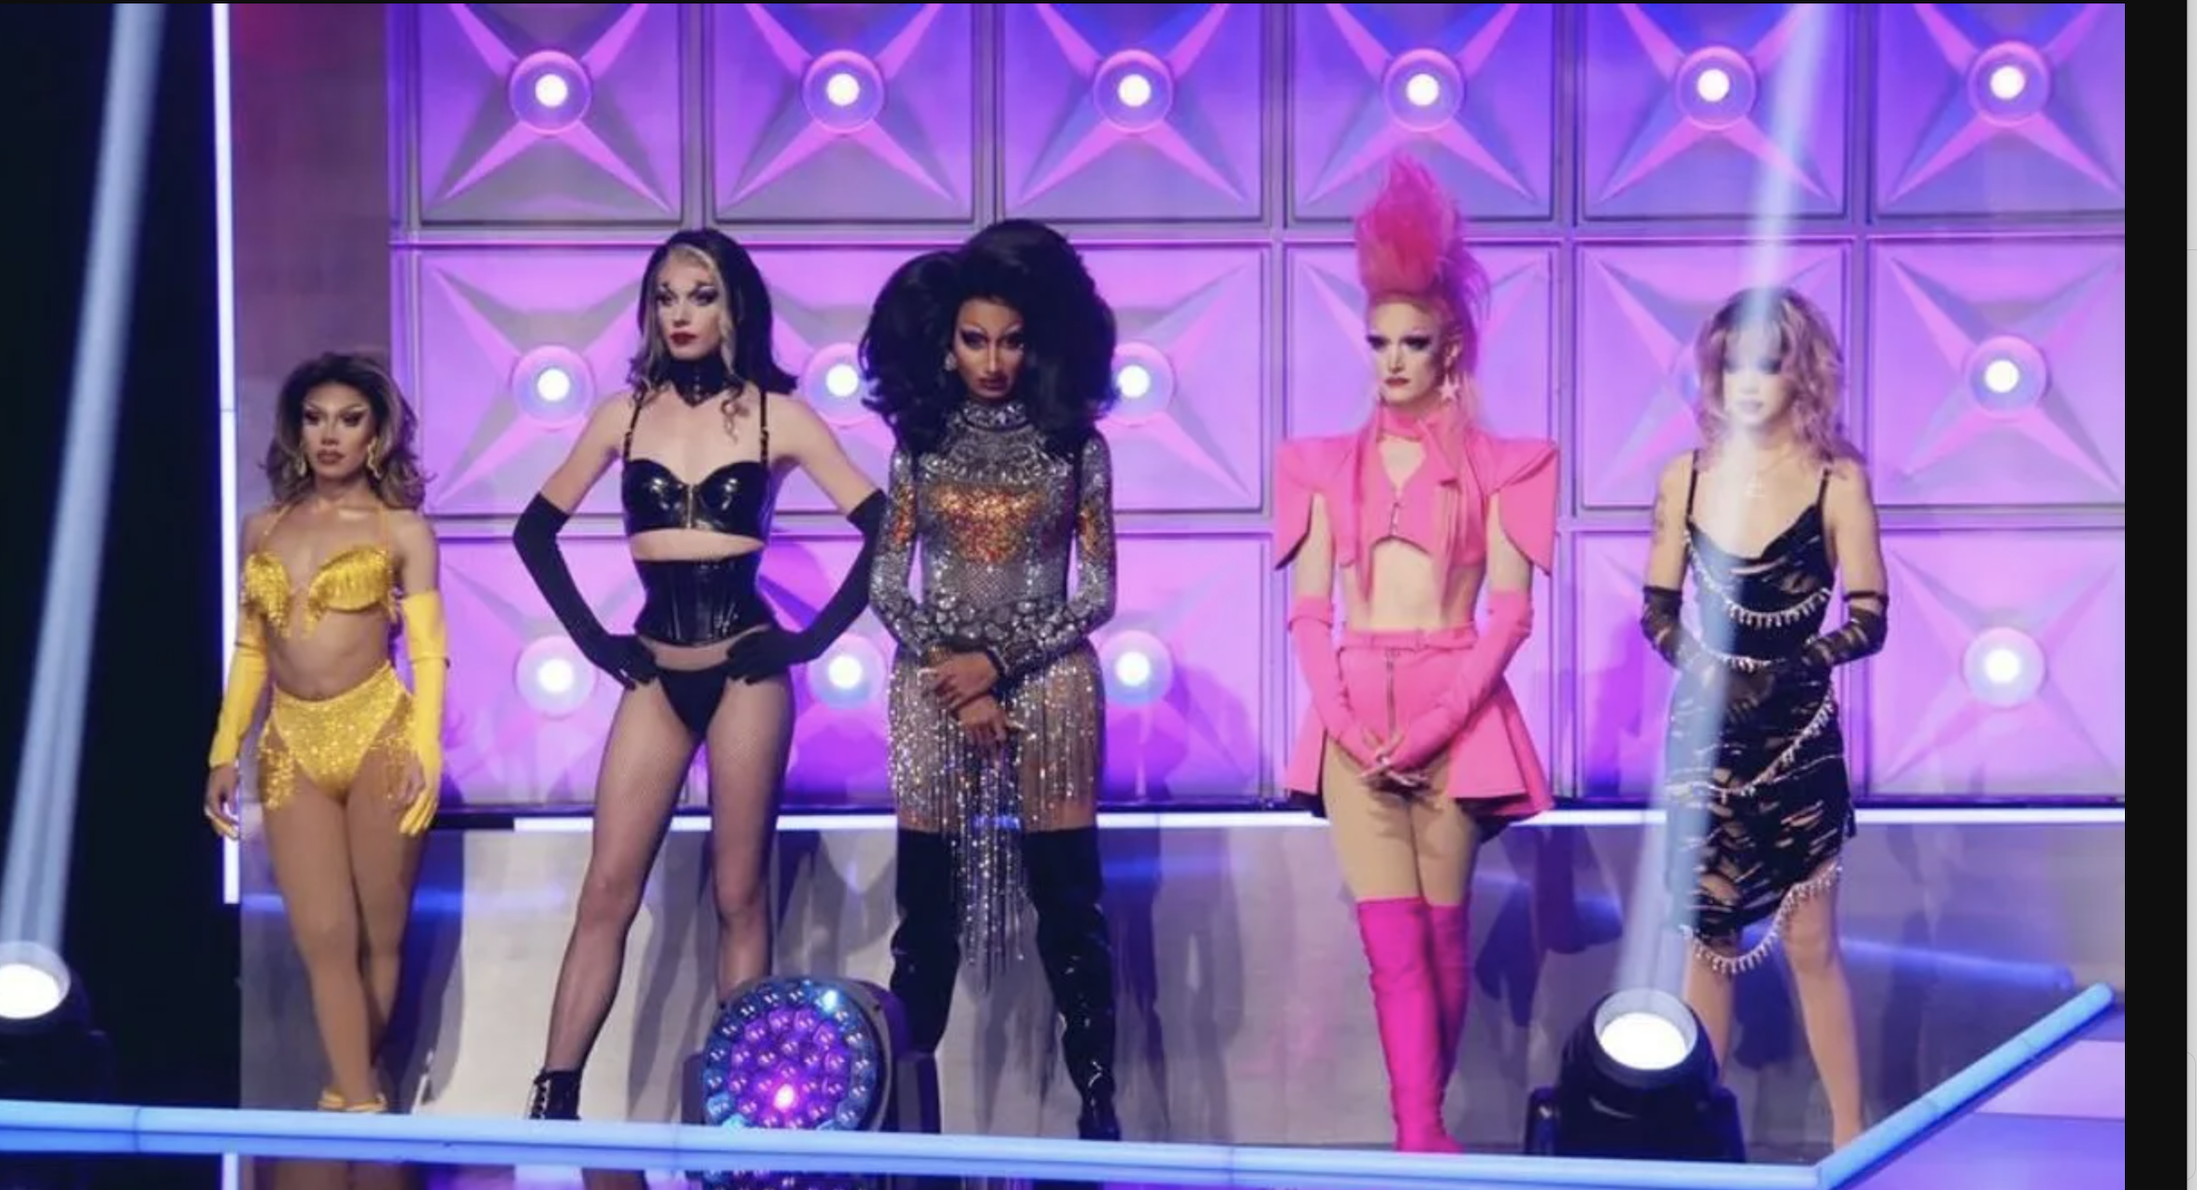 Five queens stand on the stage